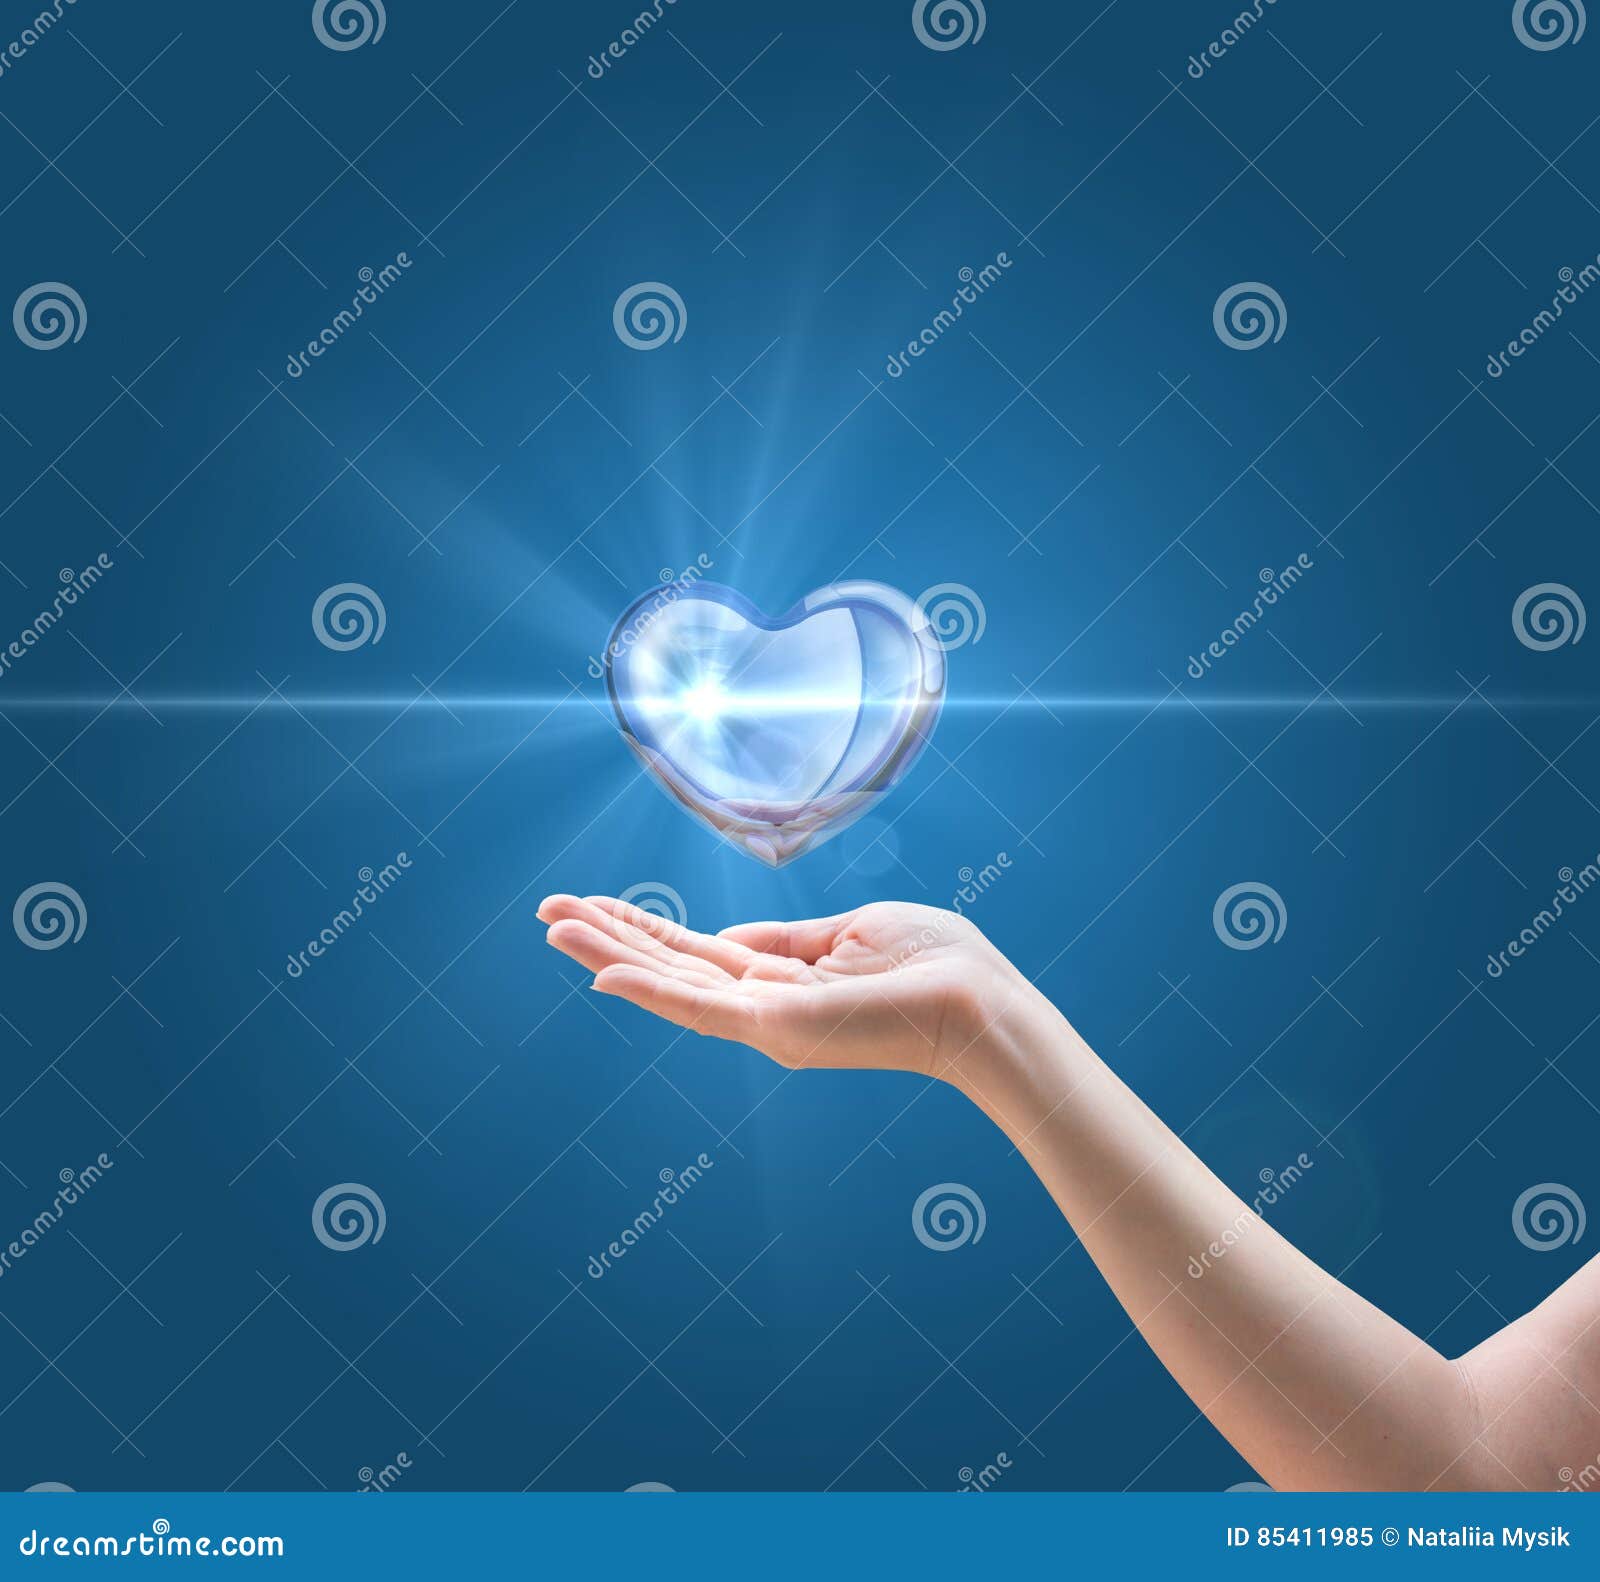 concept of a pure and healthy heart.